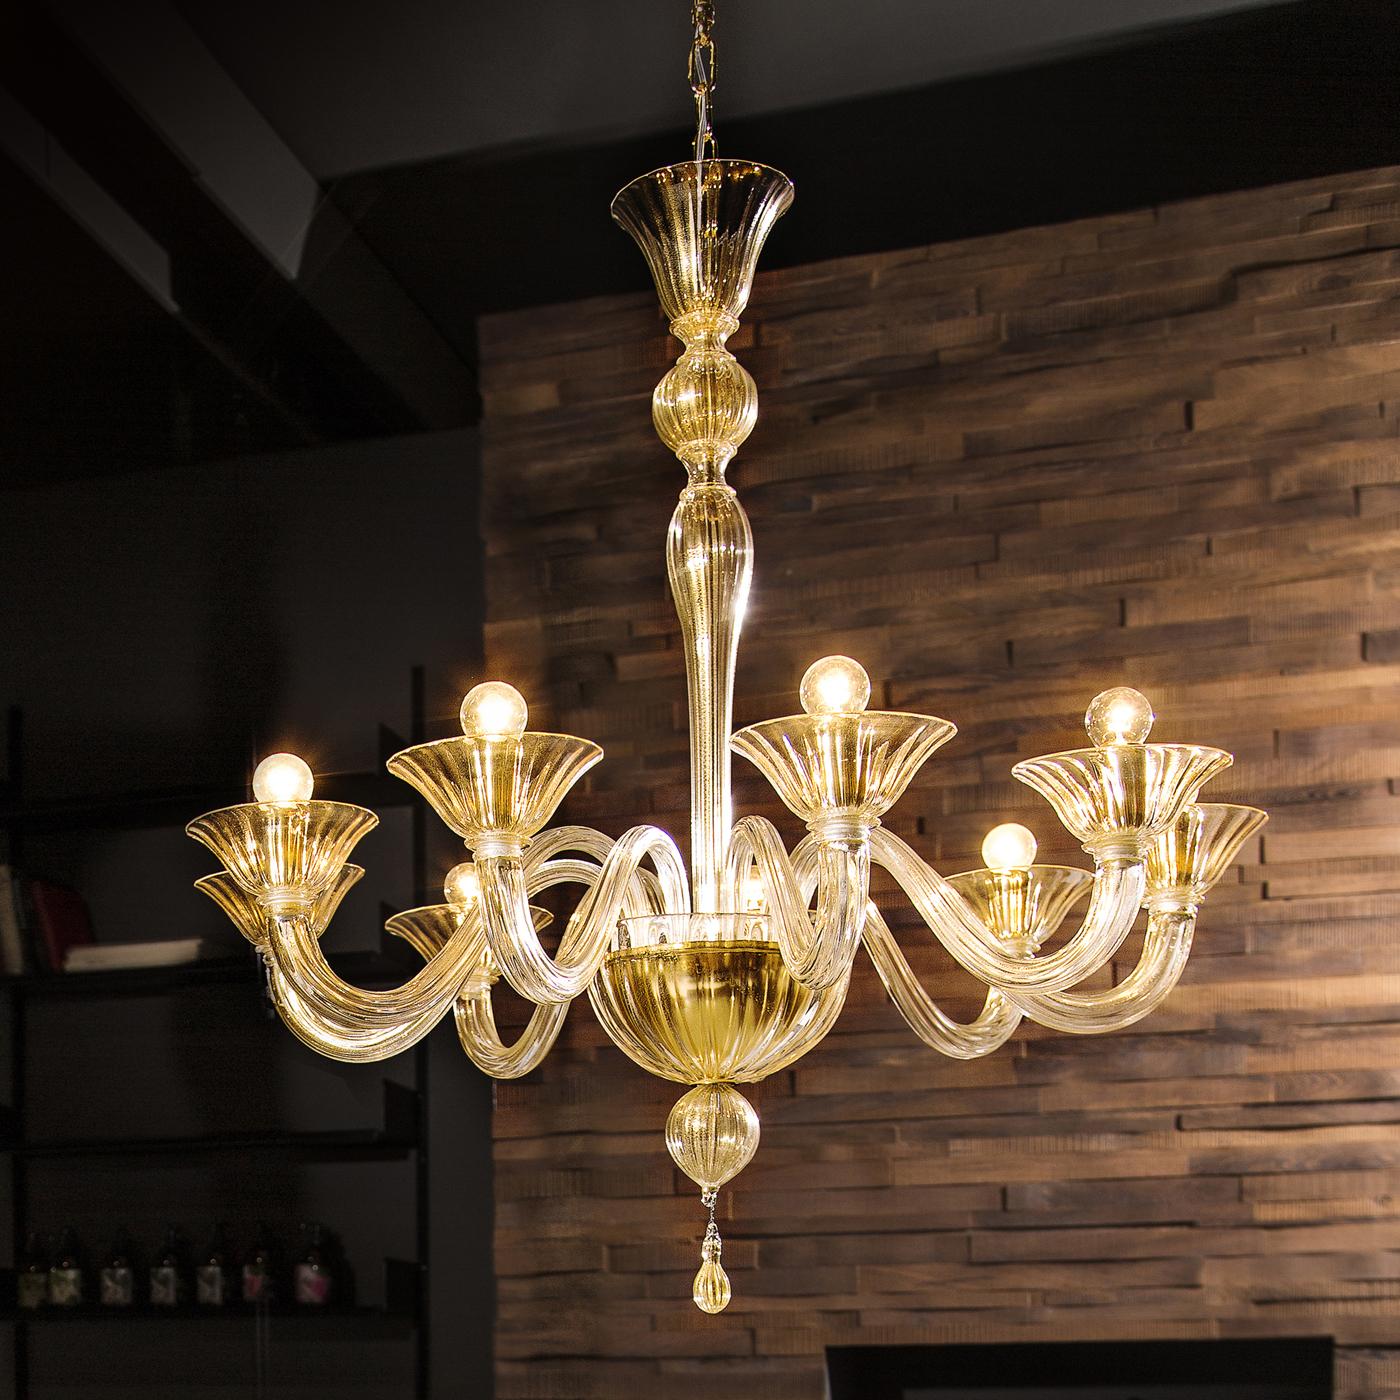 A tribute to the classic and ornate Venetian style, this chandelier is part of a series of exclusive designs named after famous Venetian doges that celebrate the craftsmanship of Murano glassblowers. Marked by well-proportioned volumes and a sinuous